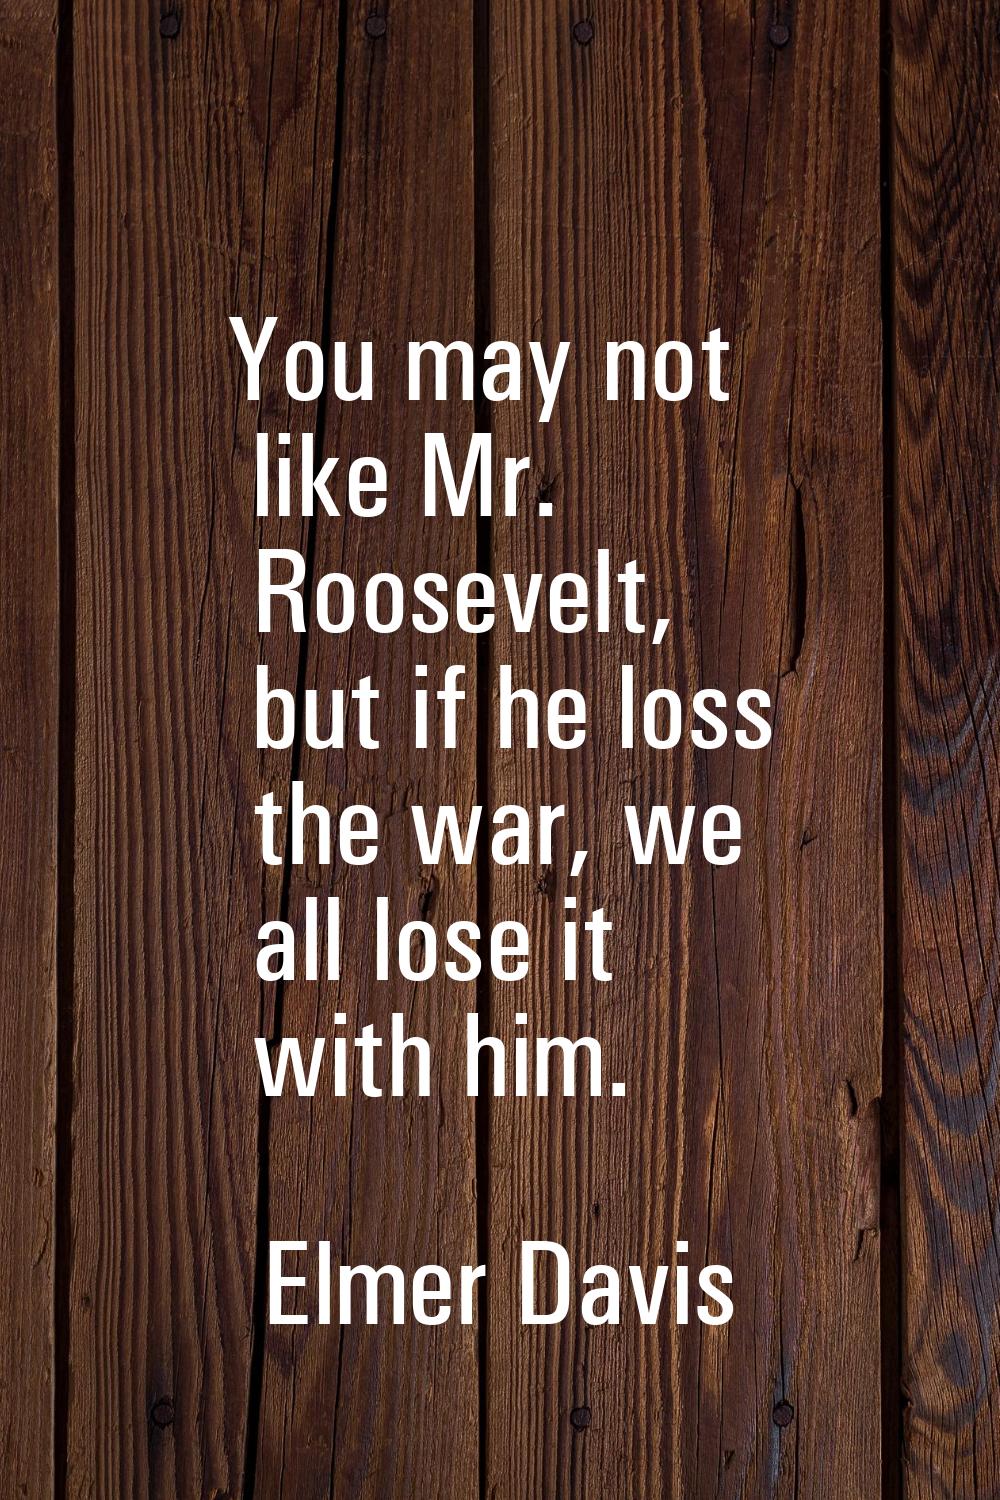 You may not like Mr. Roosevelt, but if he loss the war, we all lose it with him.